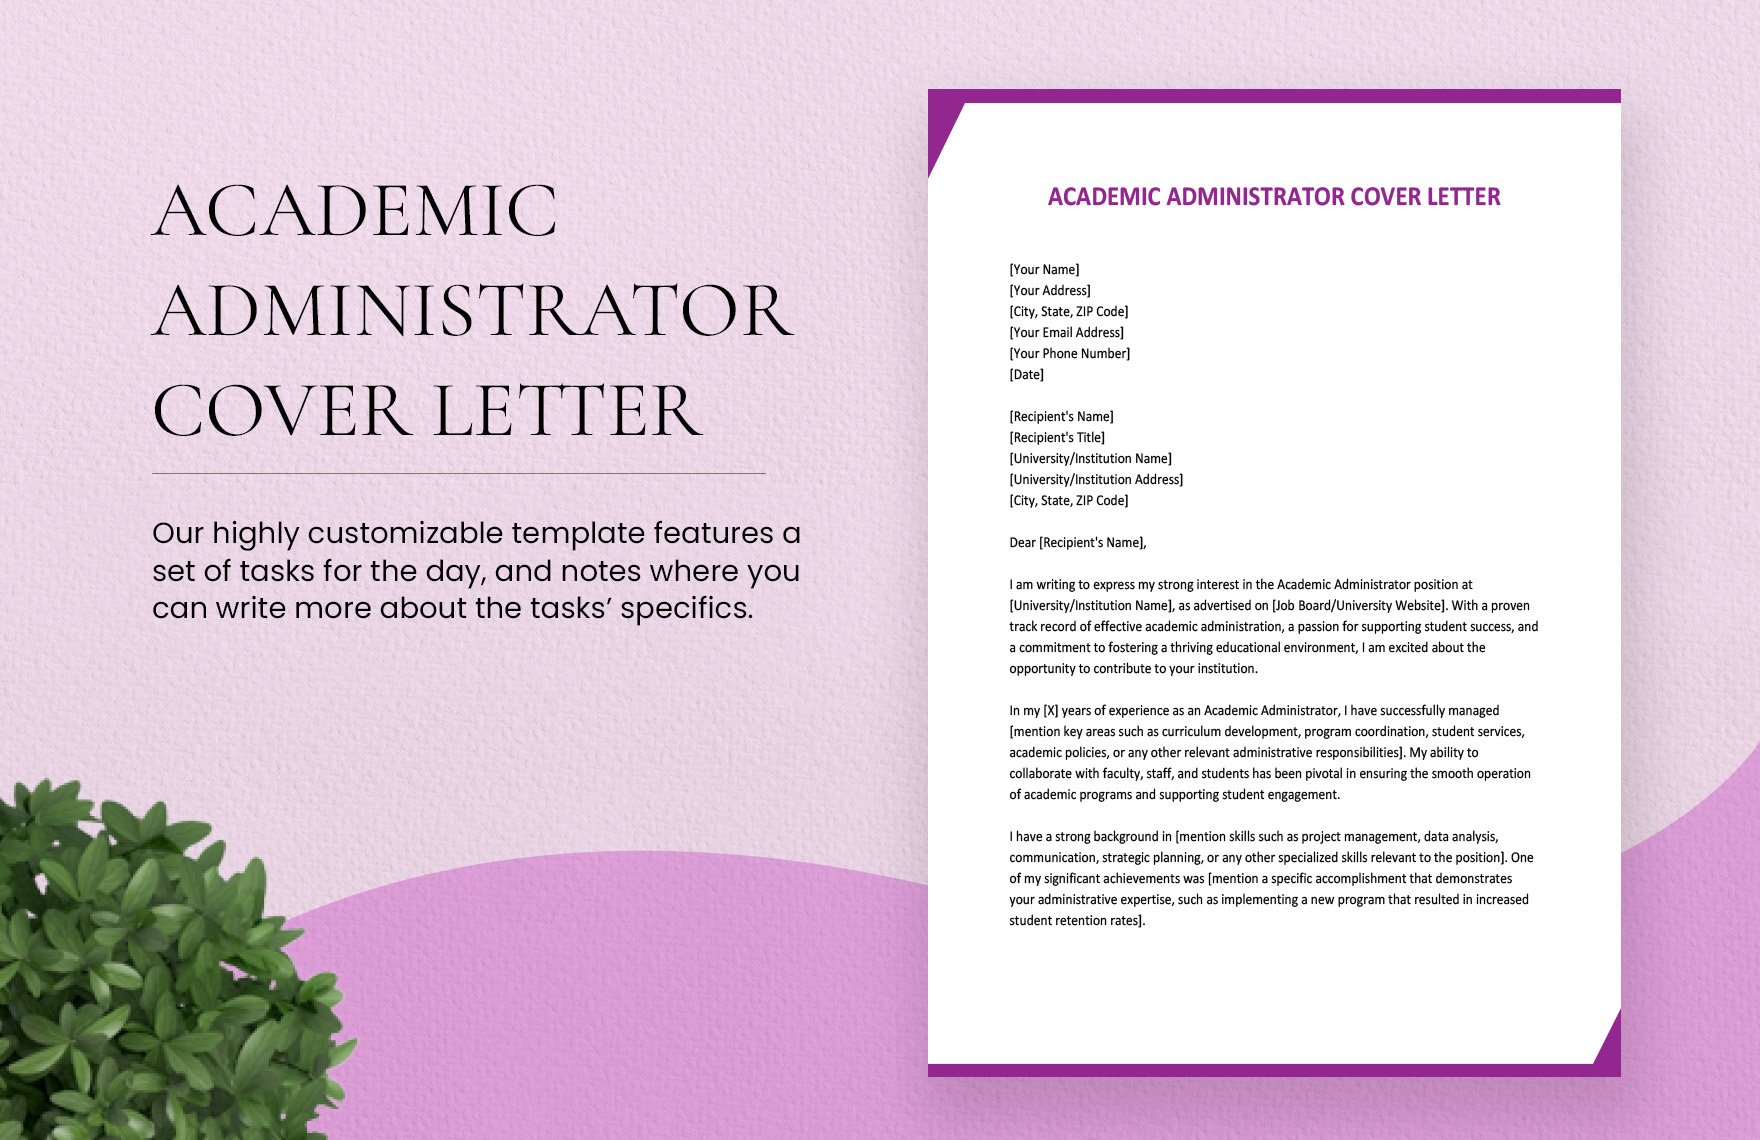 Academic Administrator Cover Letter